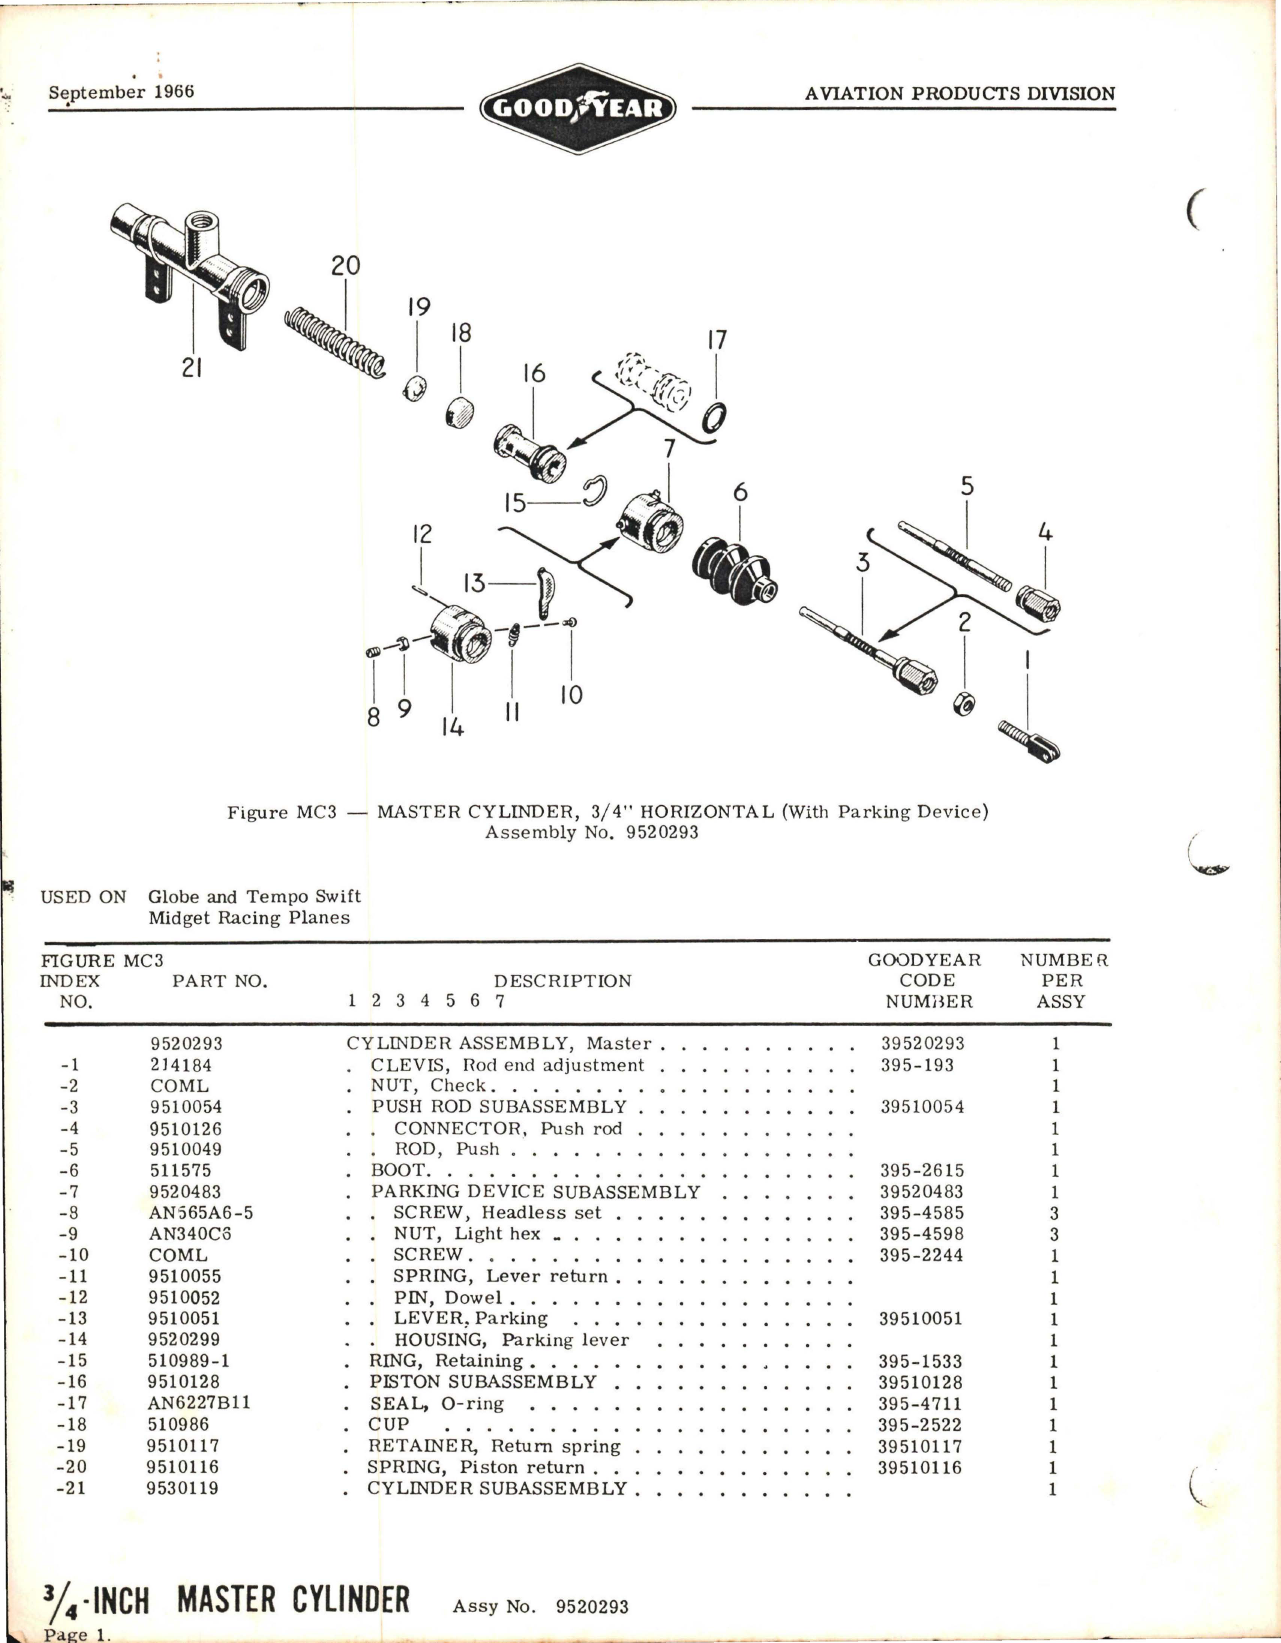 Sample page 1 from AirCorps Library document: Master Cylinder 3/4 inch Horizontal and Vertical 